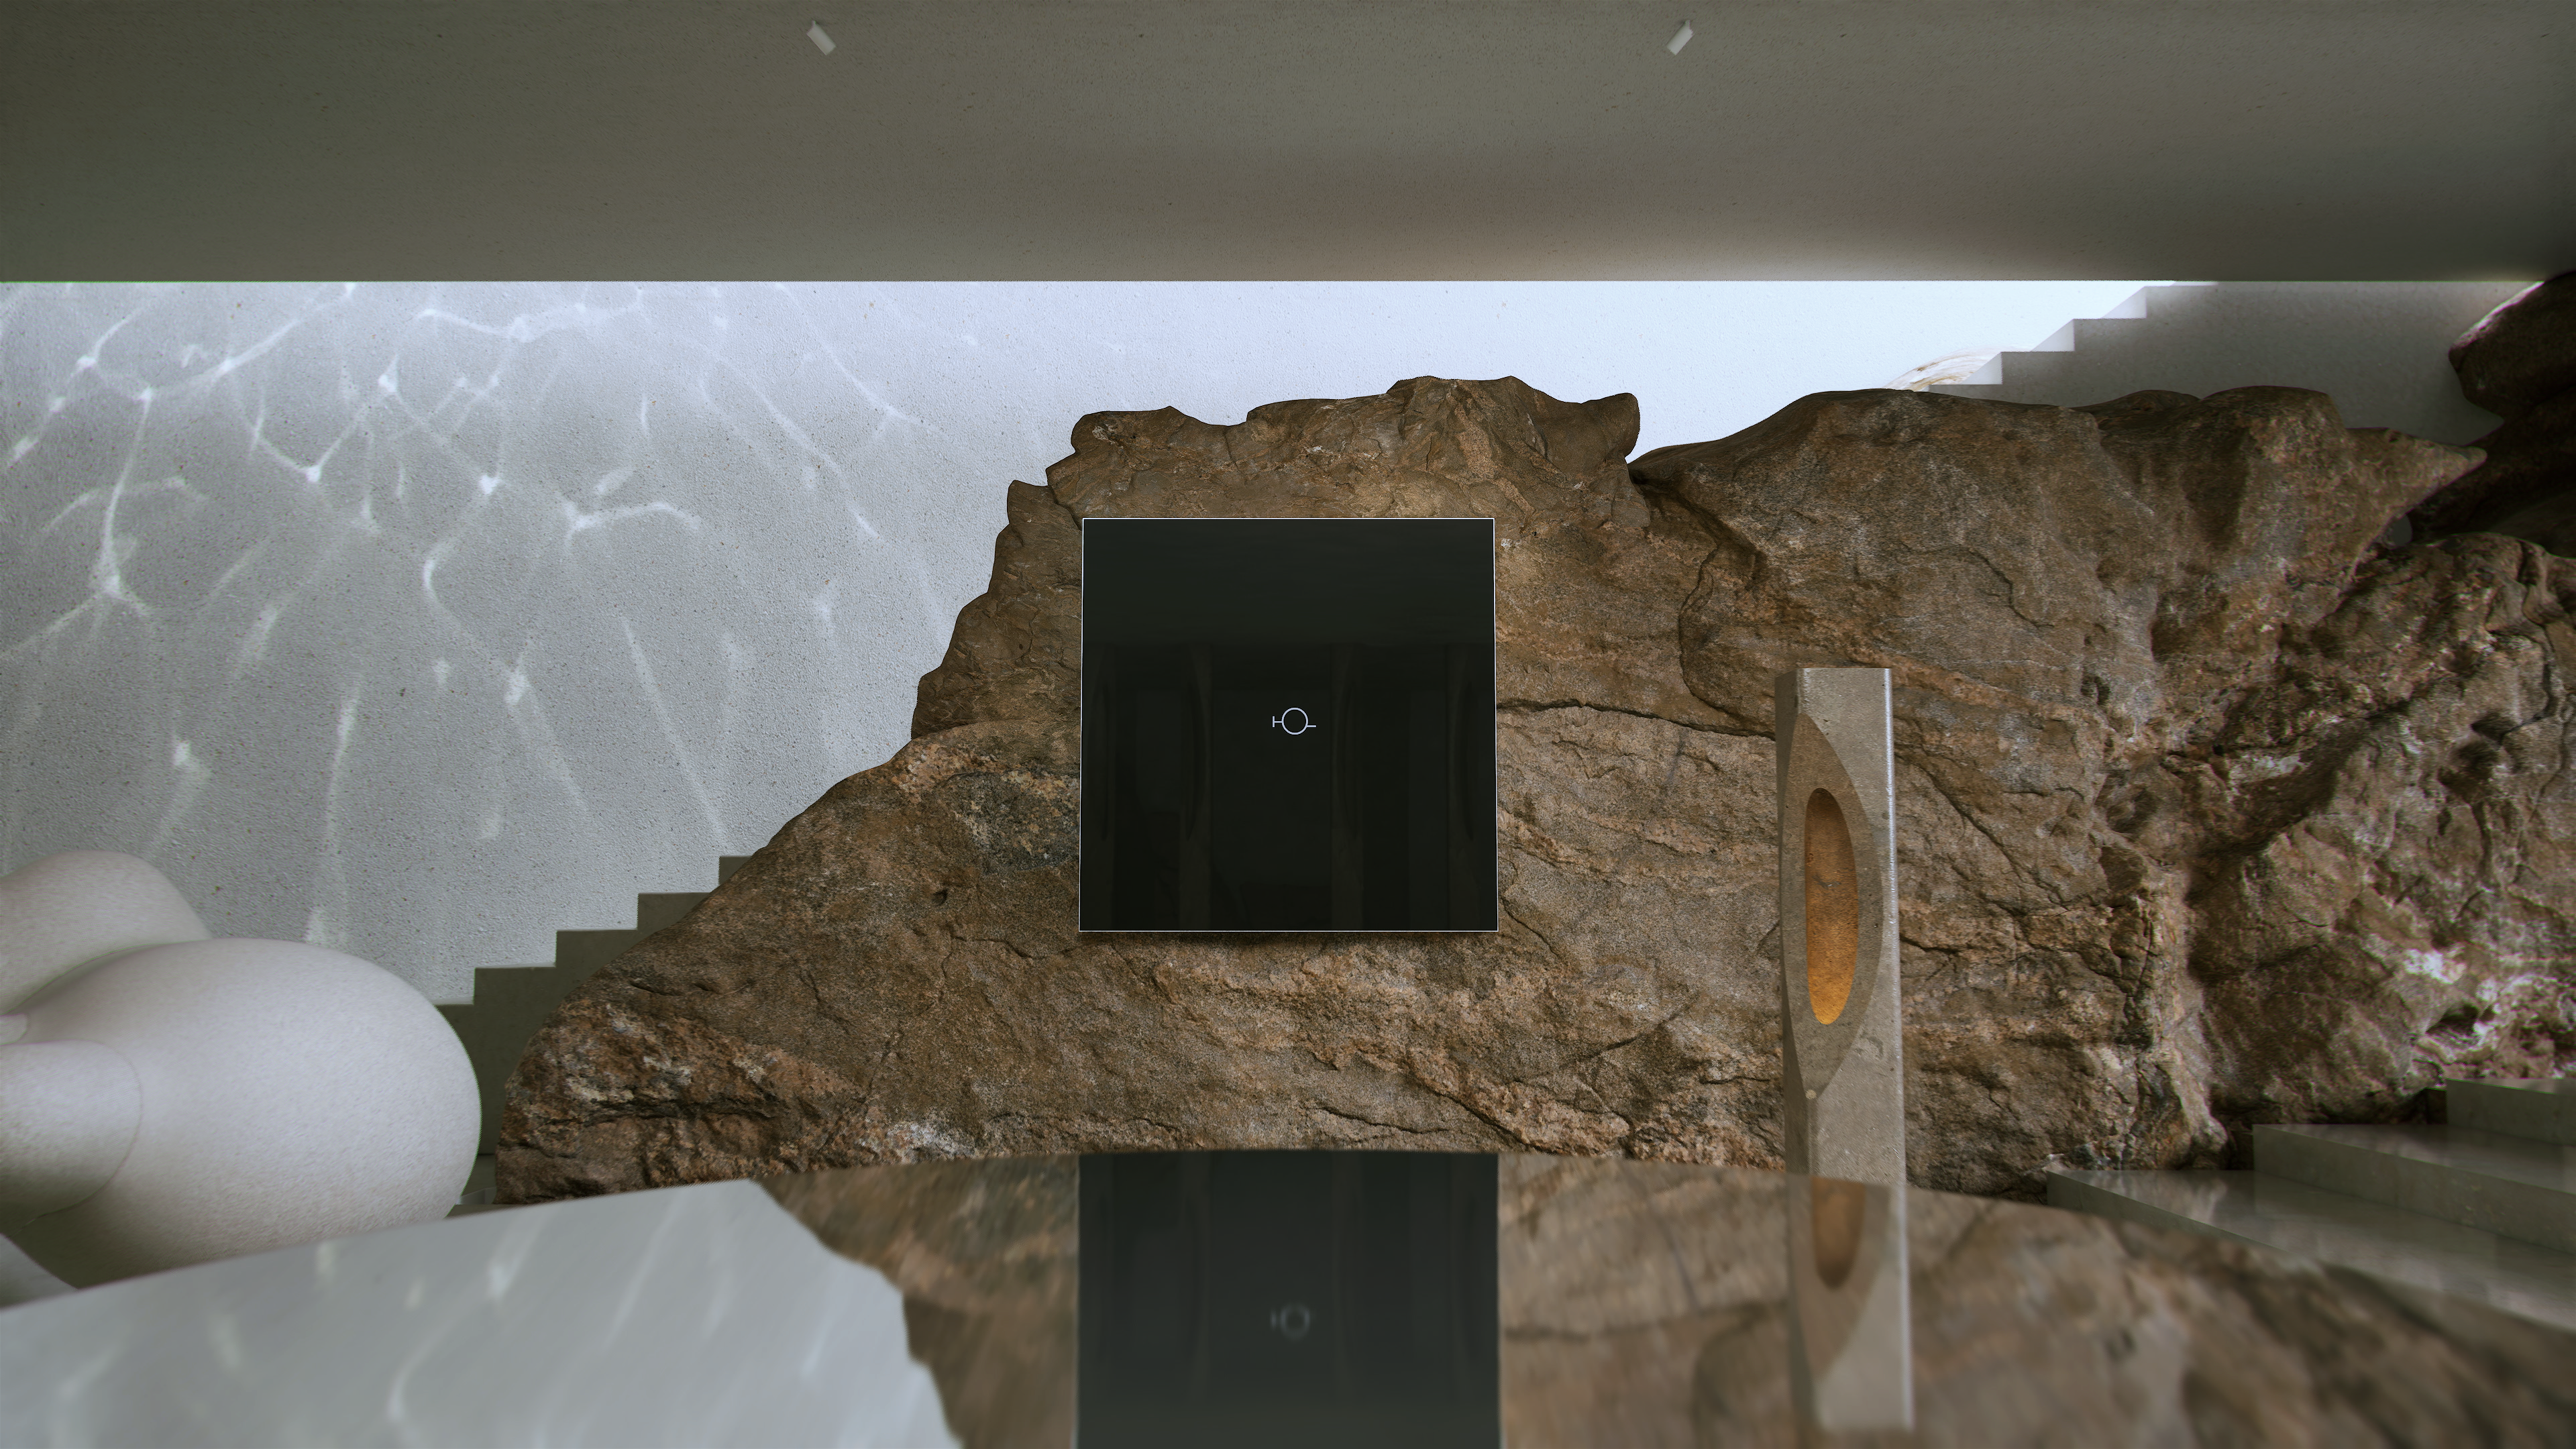 An abstract composition where a large rugged rock formation serves as a backdrop to a sleek black frame showcasing a dynamic white fibrous structure, complemented by a minimalist sculpture and spherical forms in the foreground within a modern architectural space